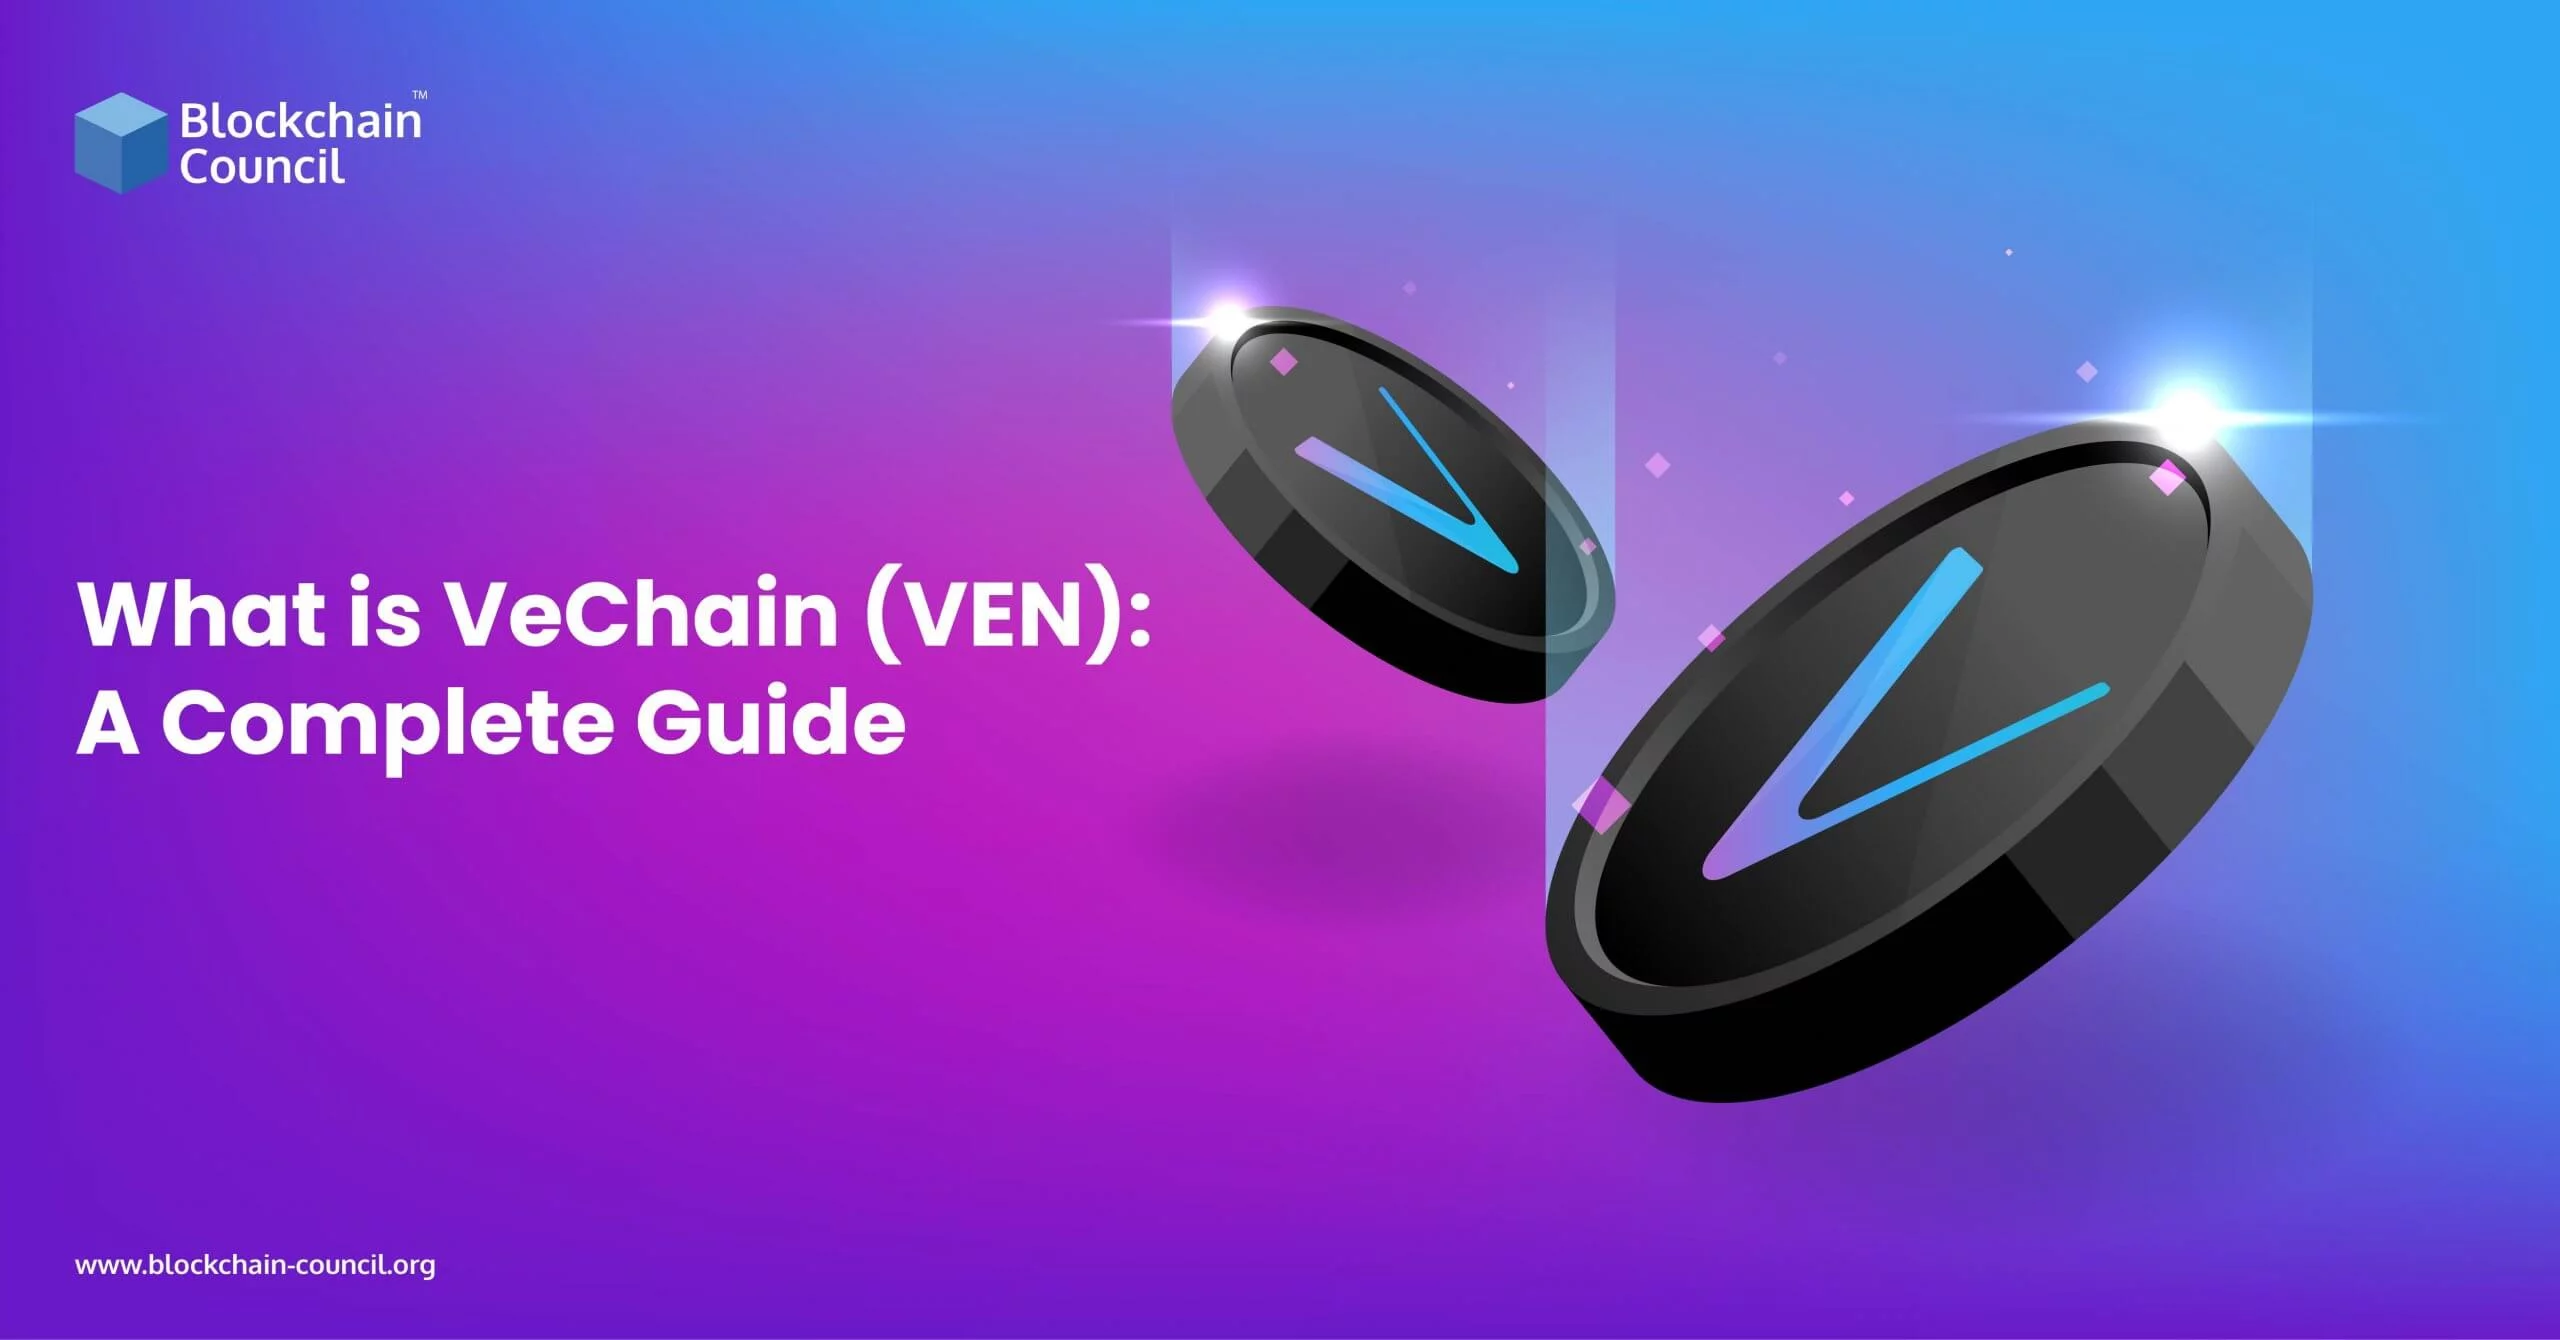 What is VeChain (VEN) A Complete Guide